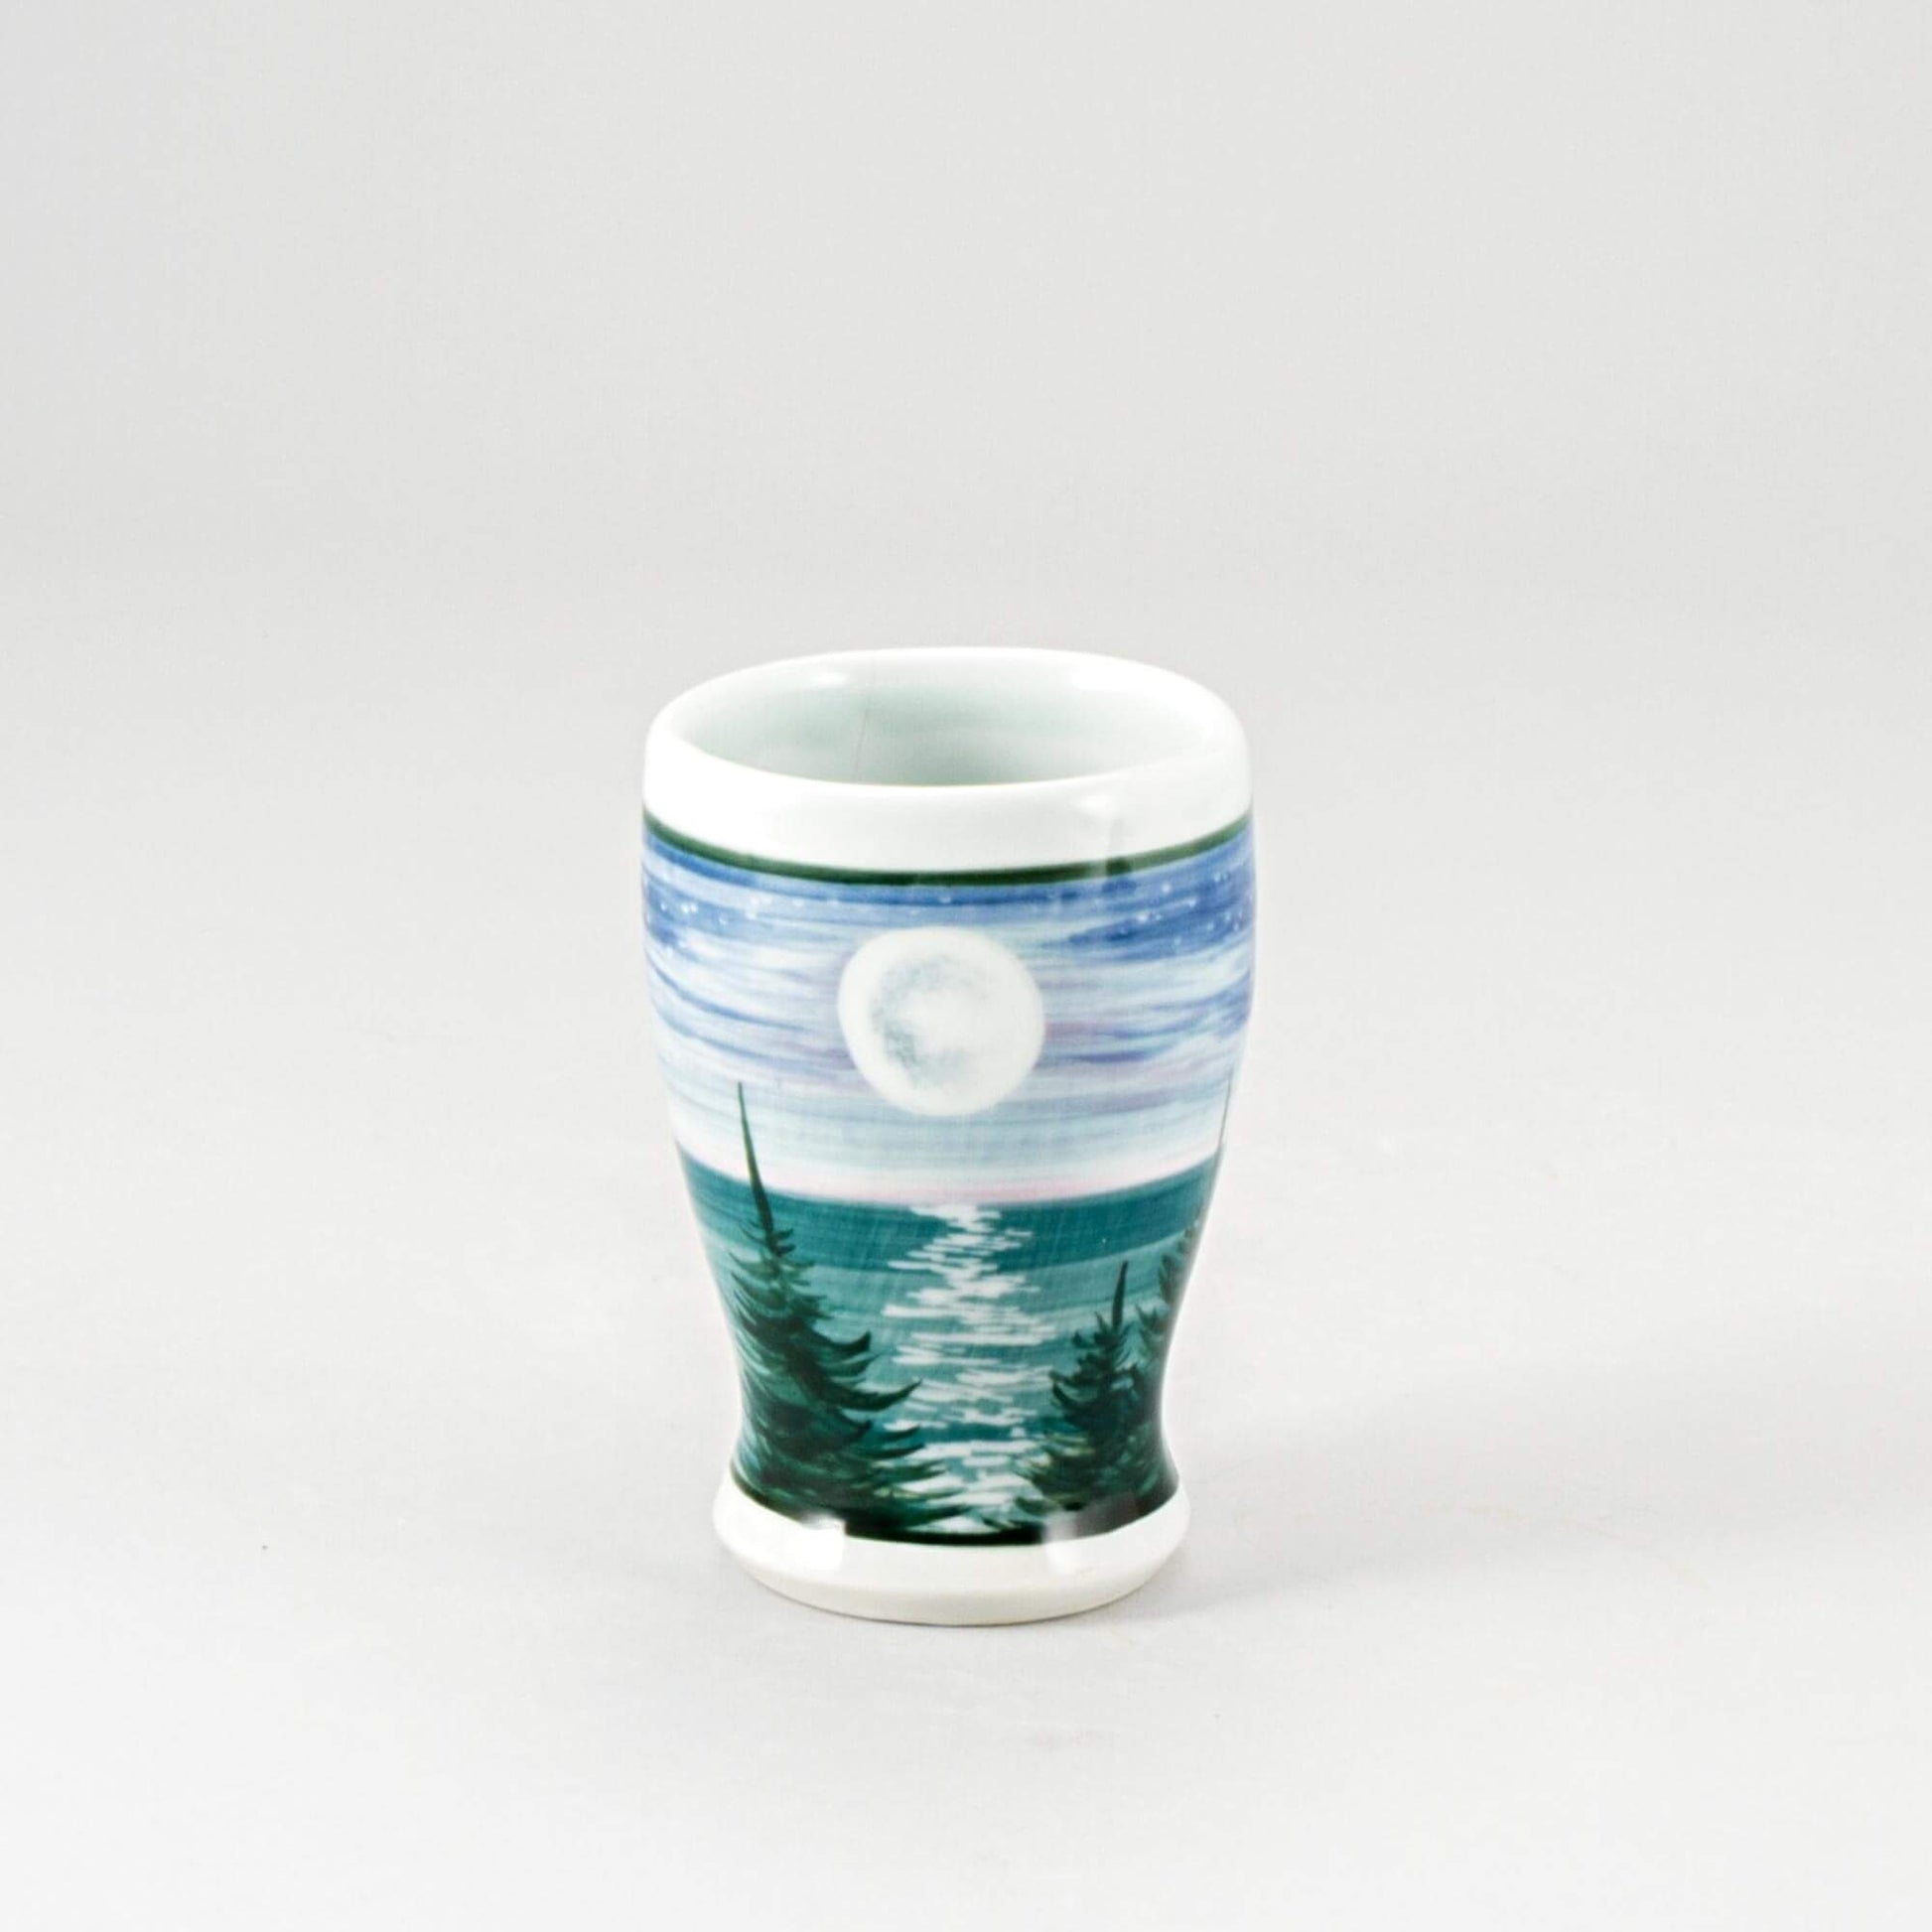 Handmade Pottery Curvy Tumbler in Moon pattern made by Georgetown Pottery in Maine